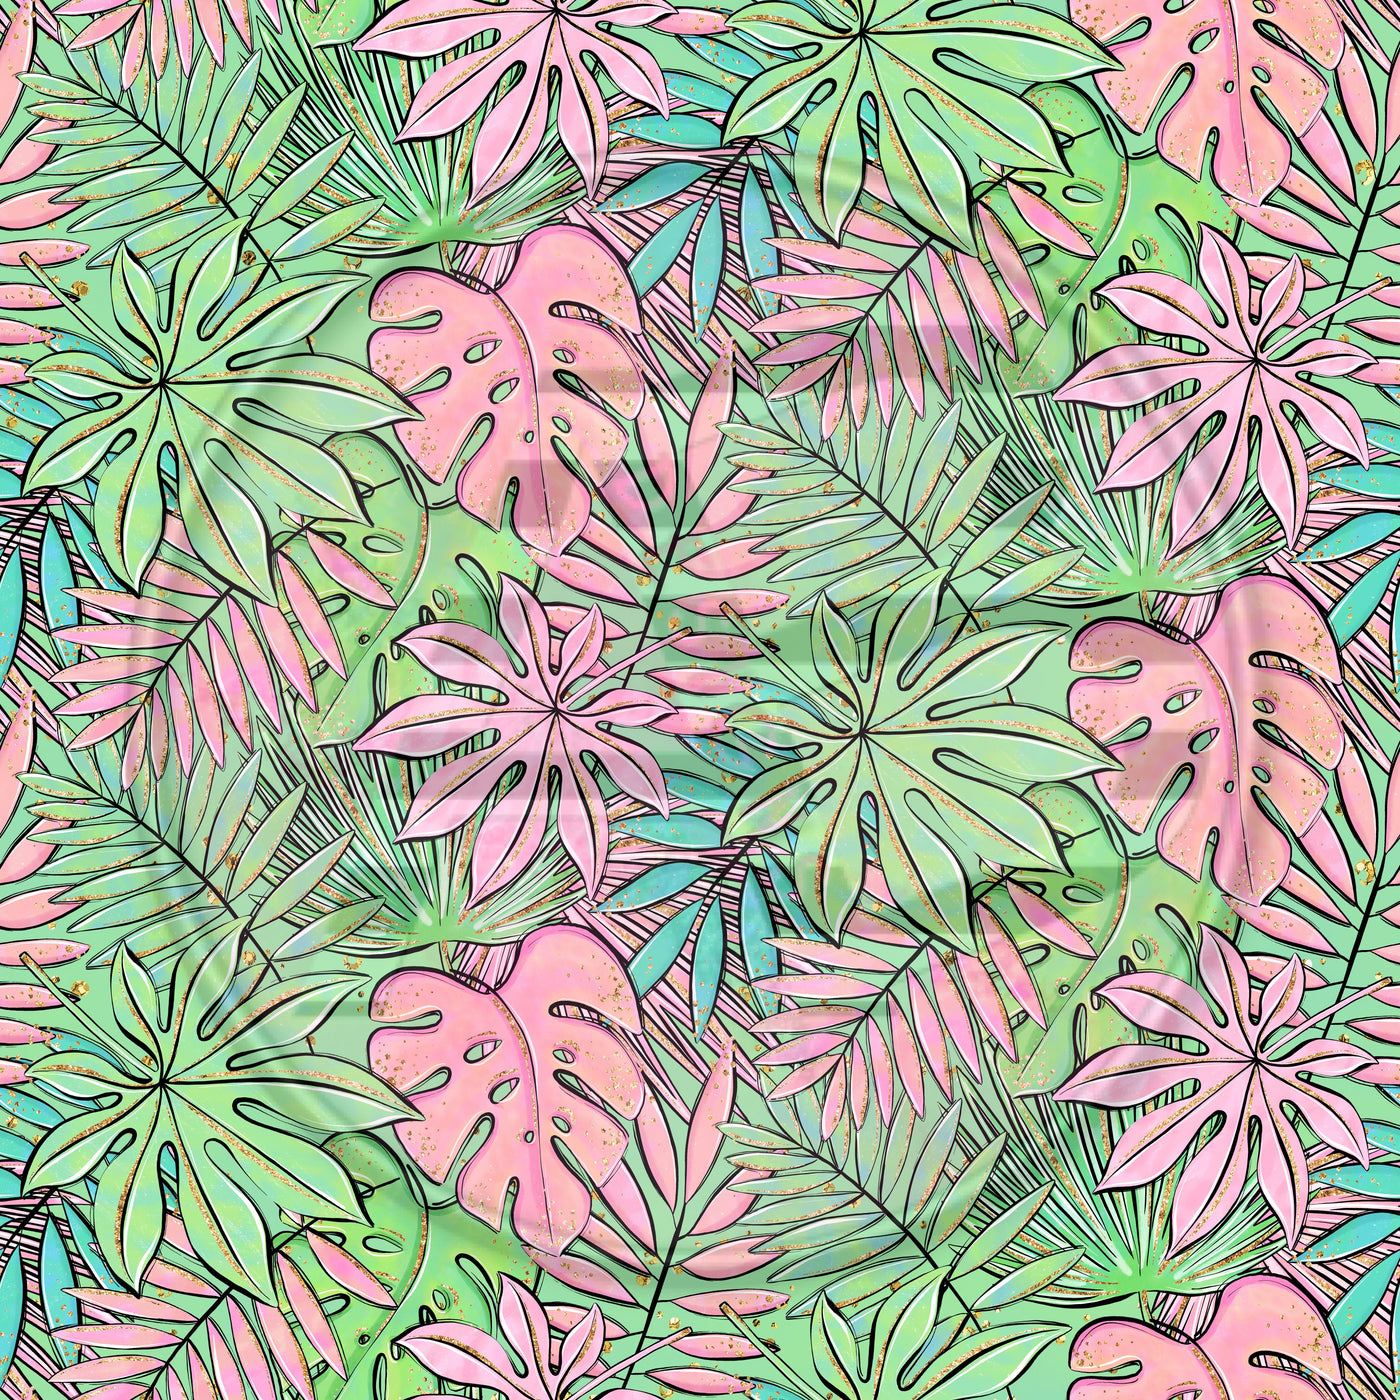 Adhesive Patterned Vinyl - Tropical 1290